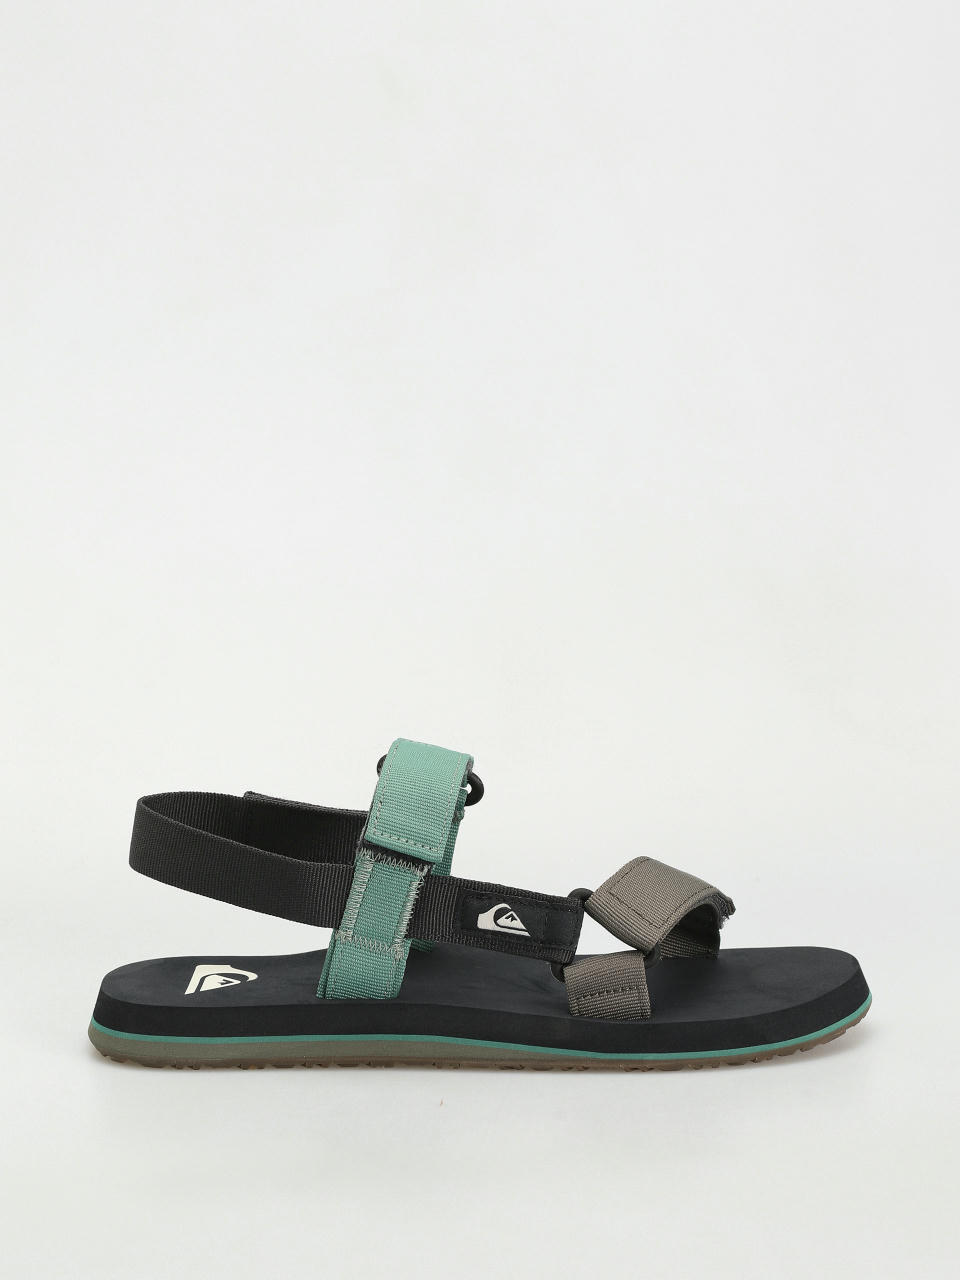 Quiksilver Monkey Caged Ii Rf Sandals (green 2)